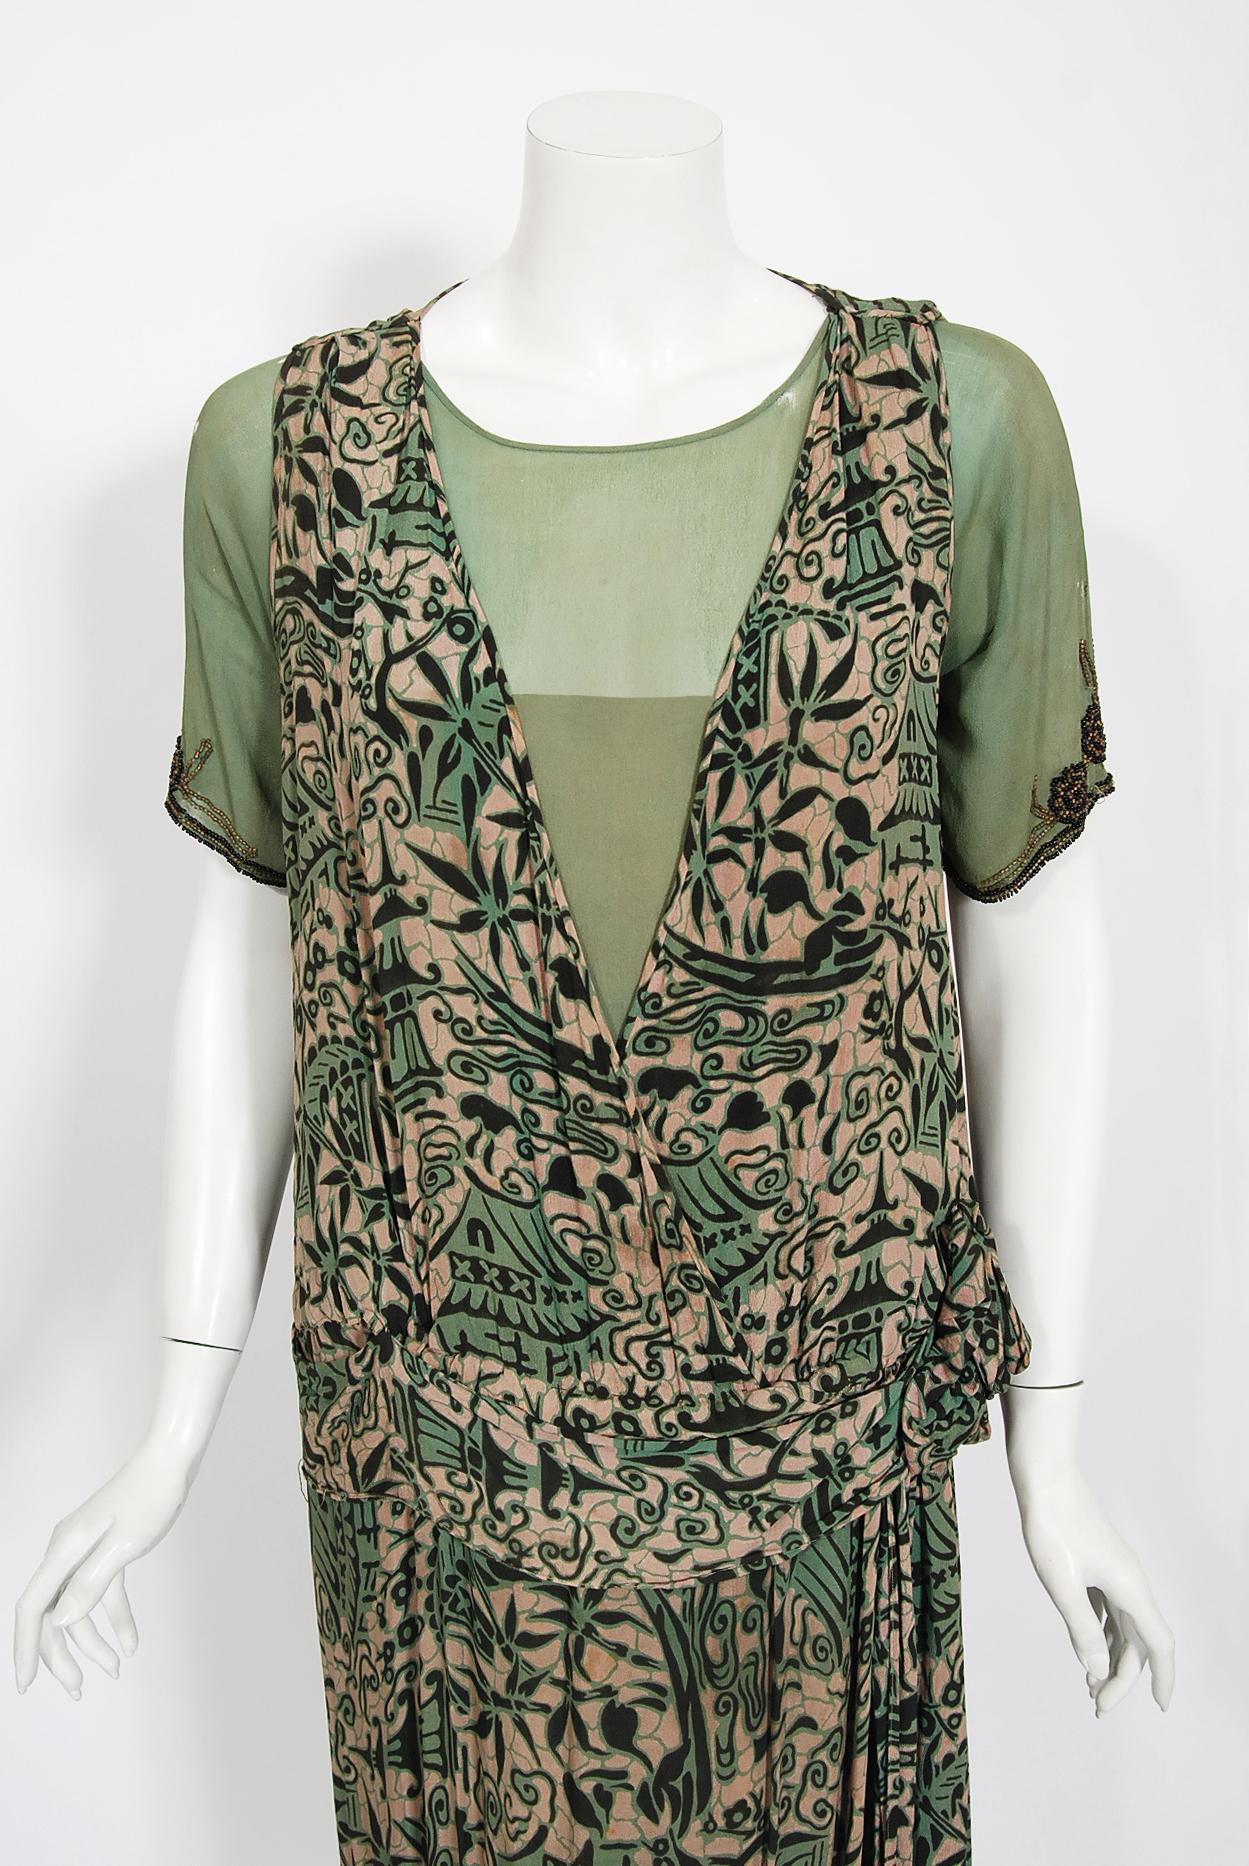 There are lots of lovely 1920's garments still around, but every once in a while I come across one that sets my heart a flutter! This is an incredibly unique 1920's sage-green silk dress with a captivating Chinese architecture scenic print. I love